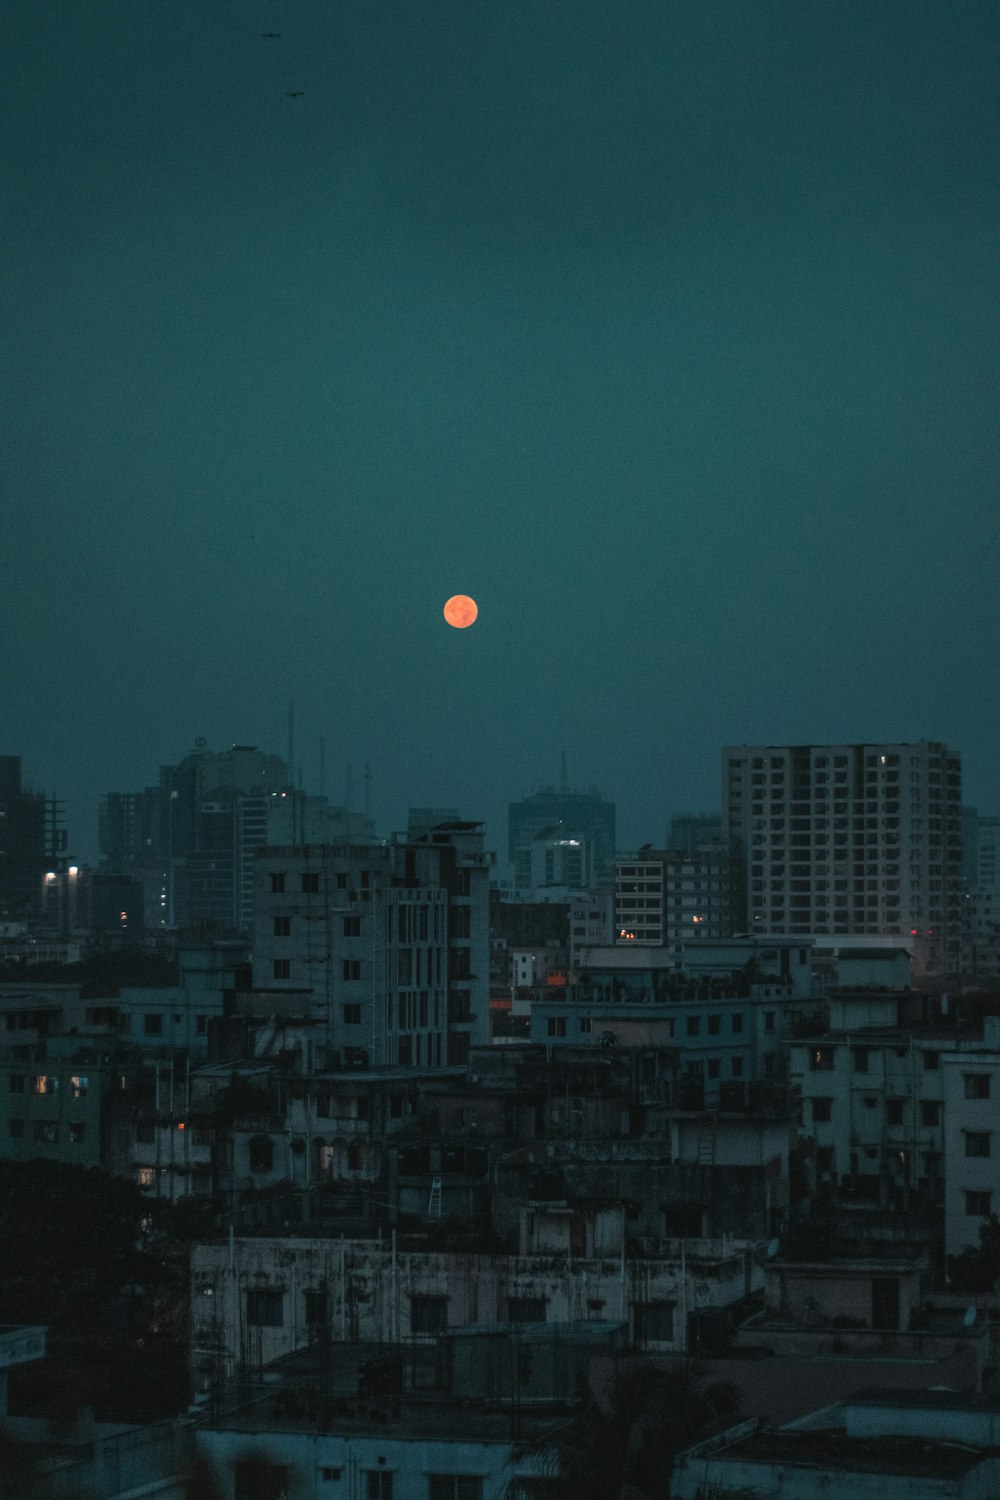 a full moon is seen over a city at night